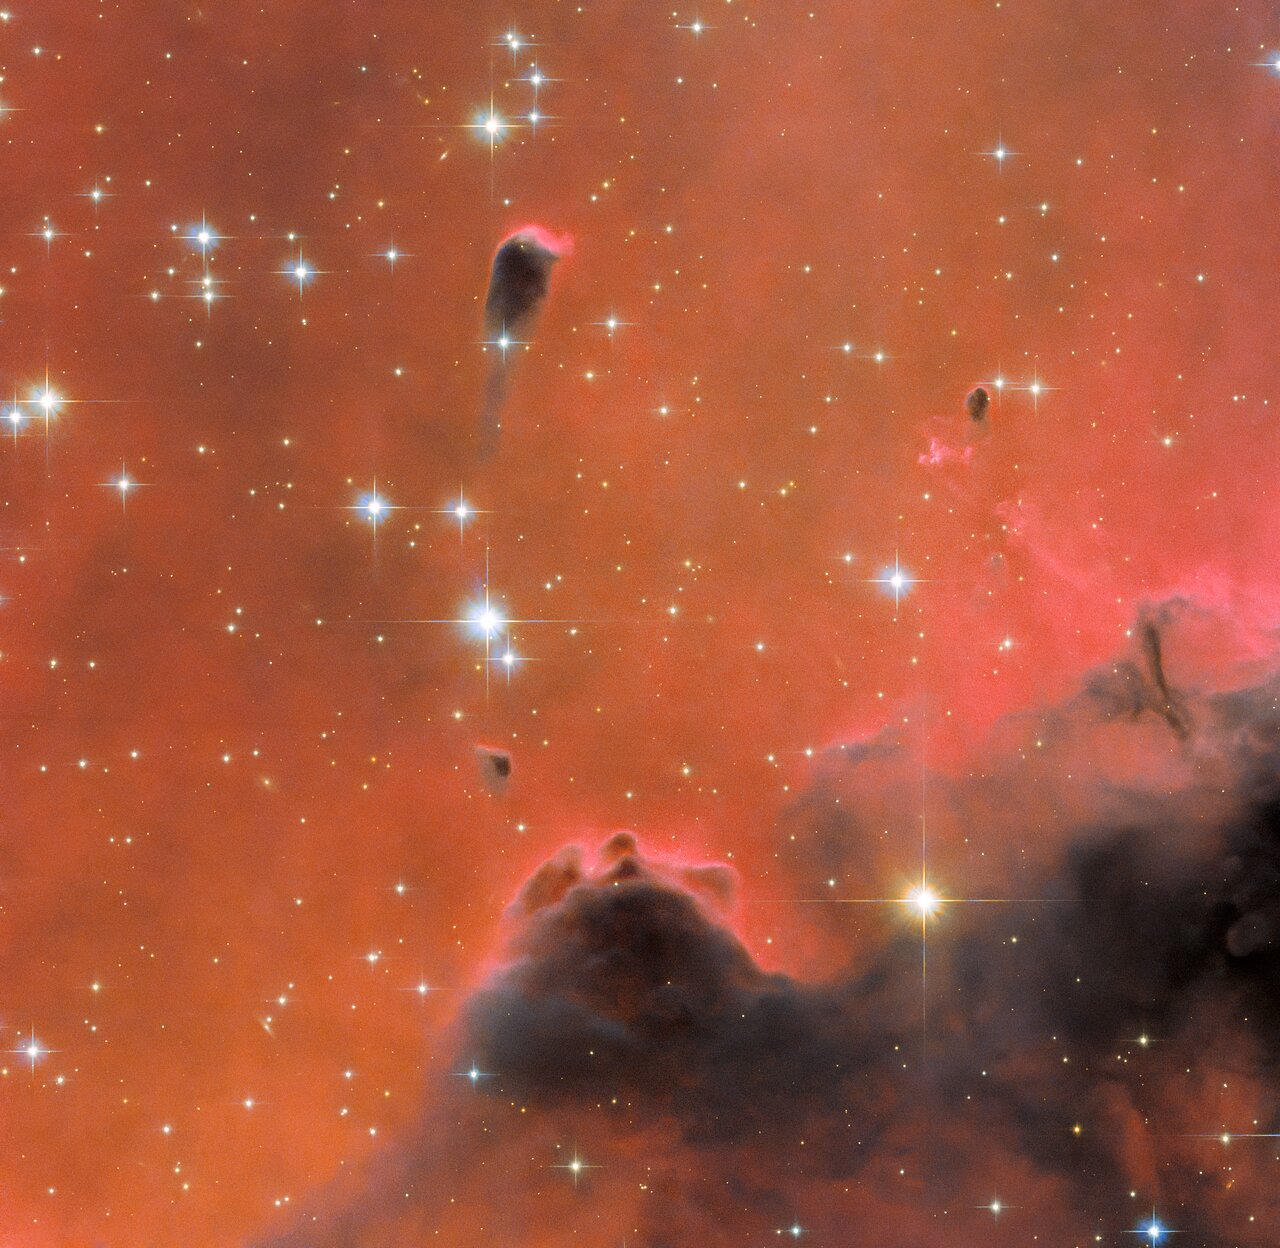 The background is filled with bright orange-red clouds of varying density. Towards the top-left, several large, pale blue stars with prominent cross-shaped spikes are scattered. A small, tadpole-shaped dark patch floats near one of these stars. More of the same dark, dense gas fills the lower-right, resembling black smoke. A bright yellow star and a smaller blue star shine in front of this.